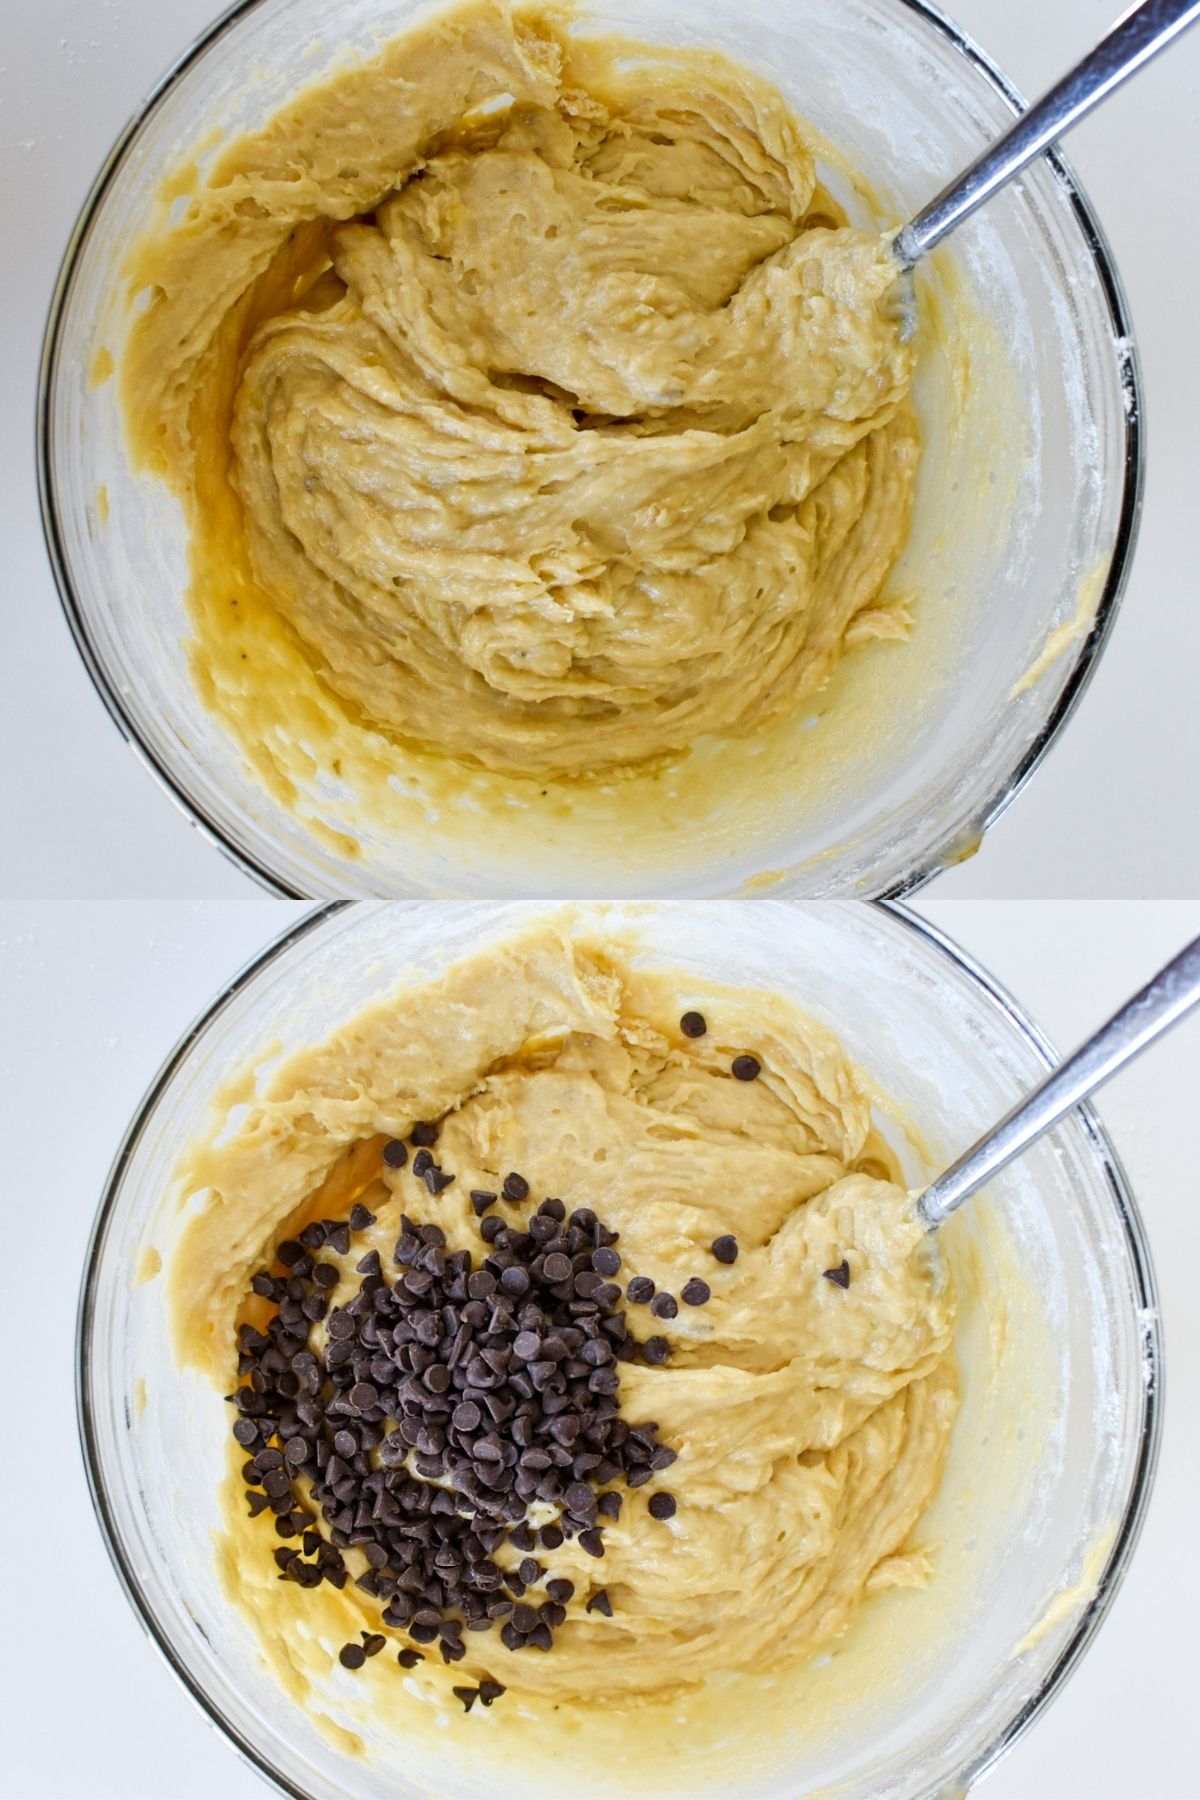 The mixed batter with chocolate chips added in a clear bowl.